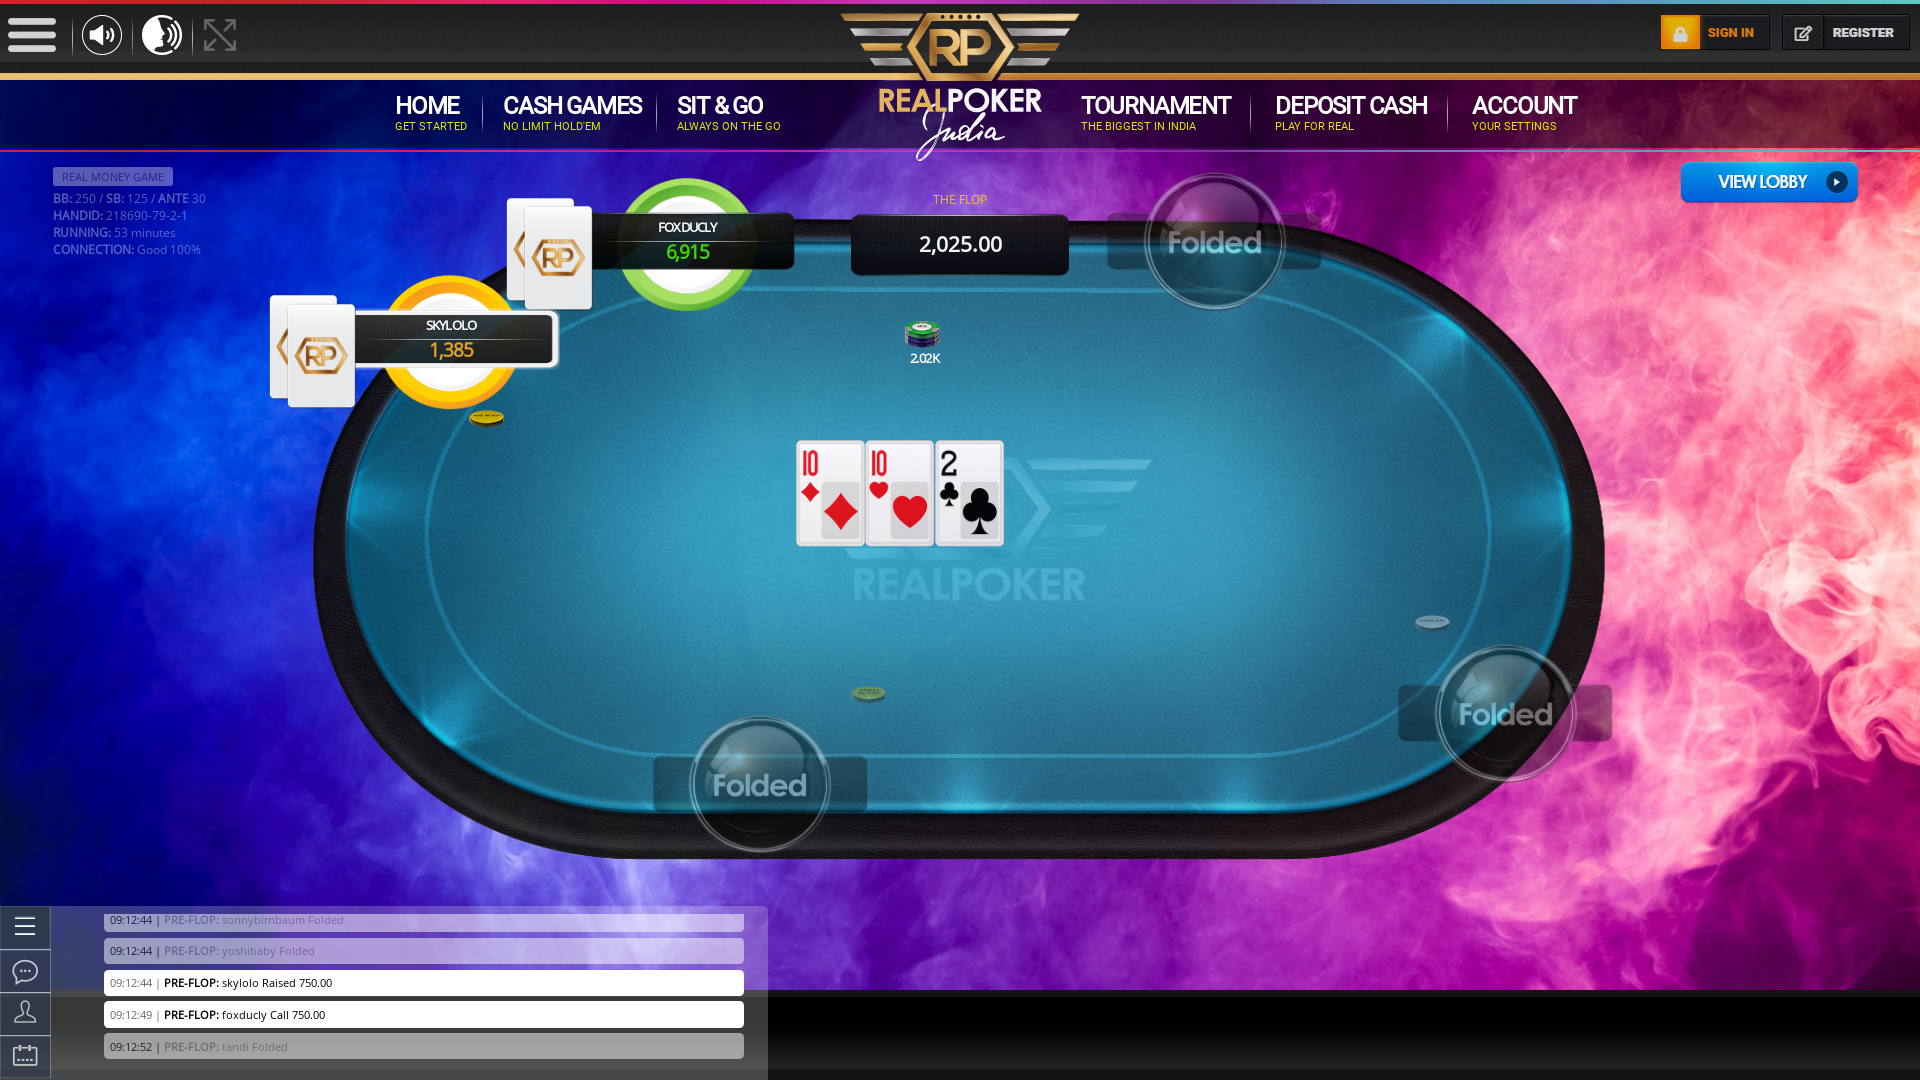 Real Indian poker on a 10 player table in the 53rd minute of the game